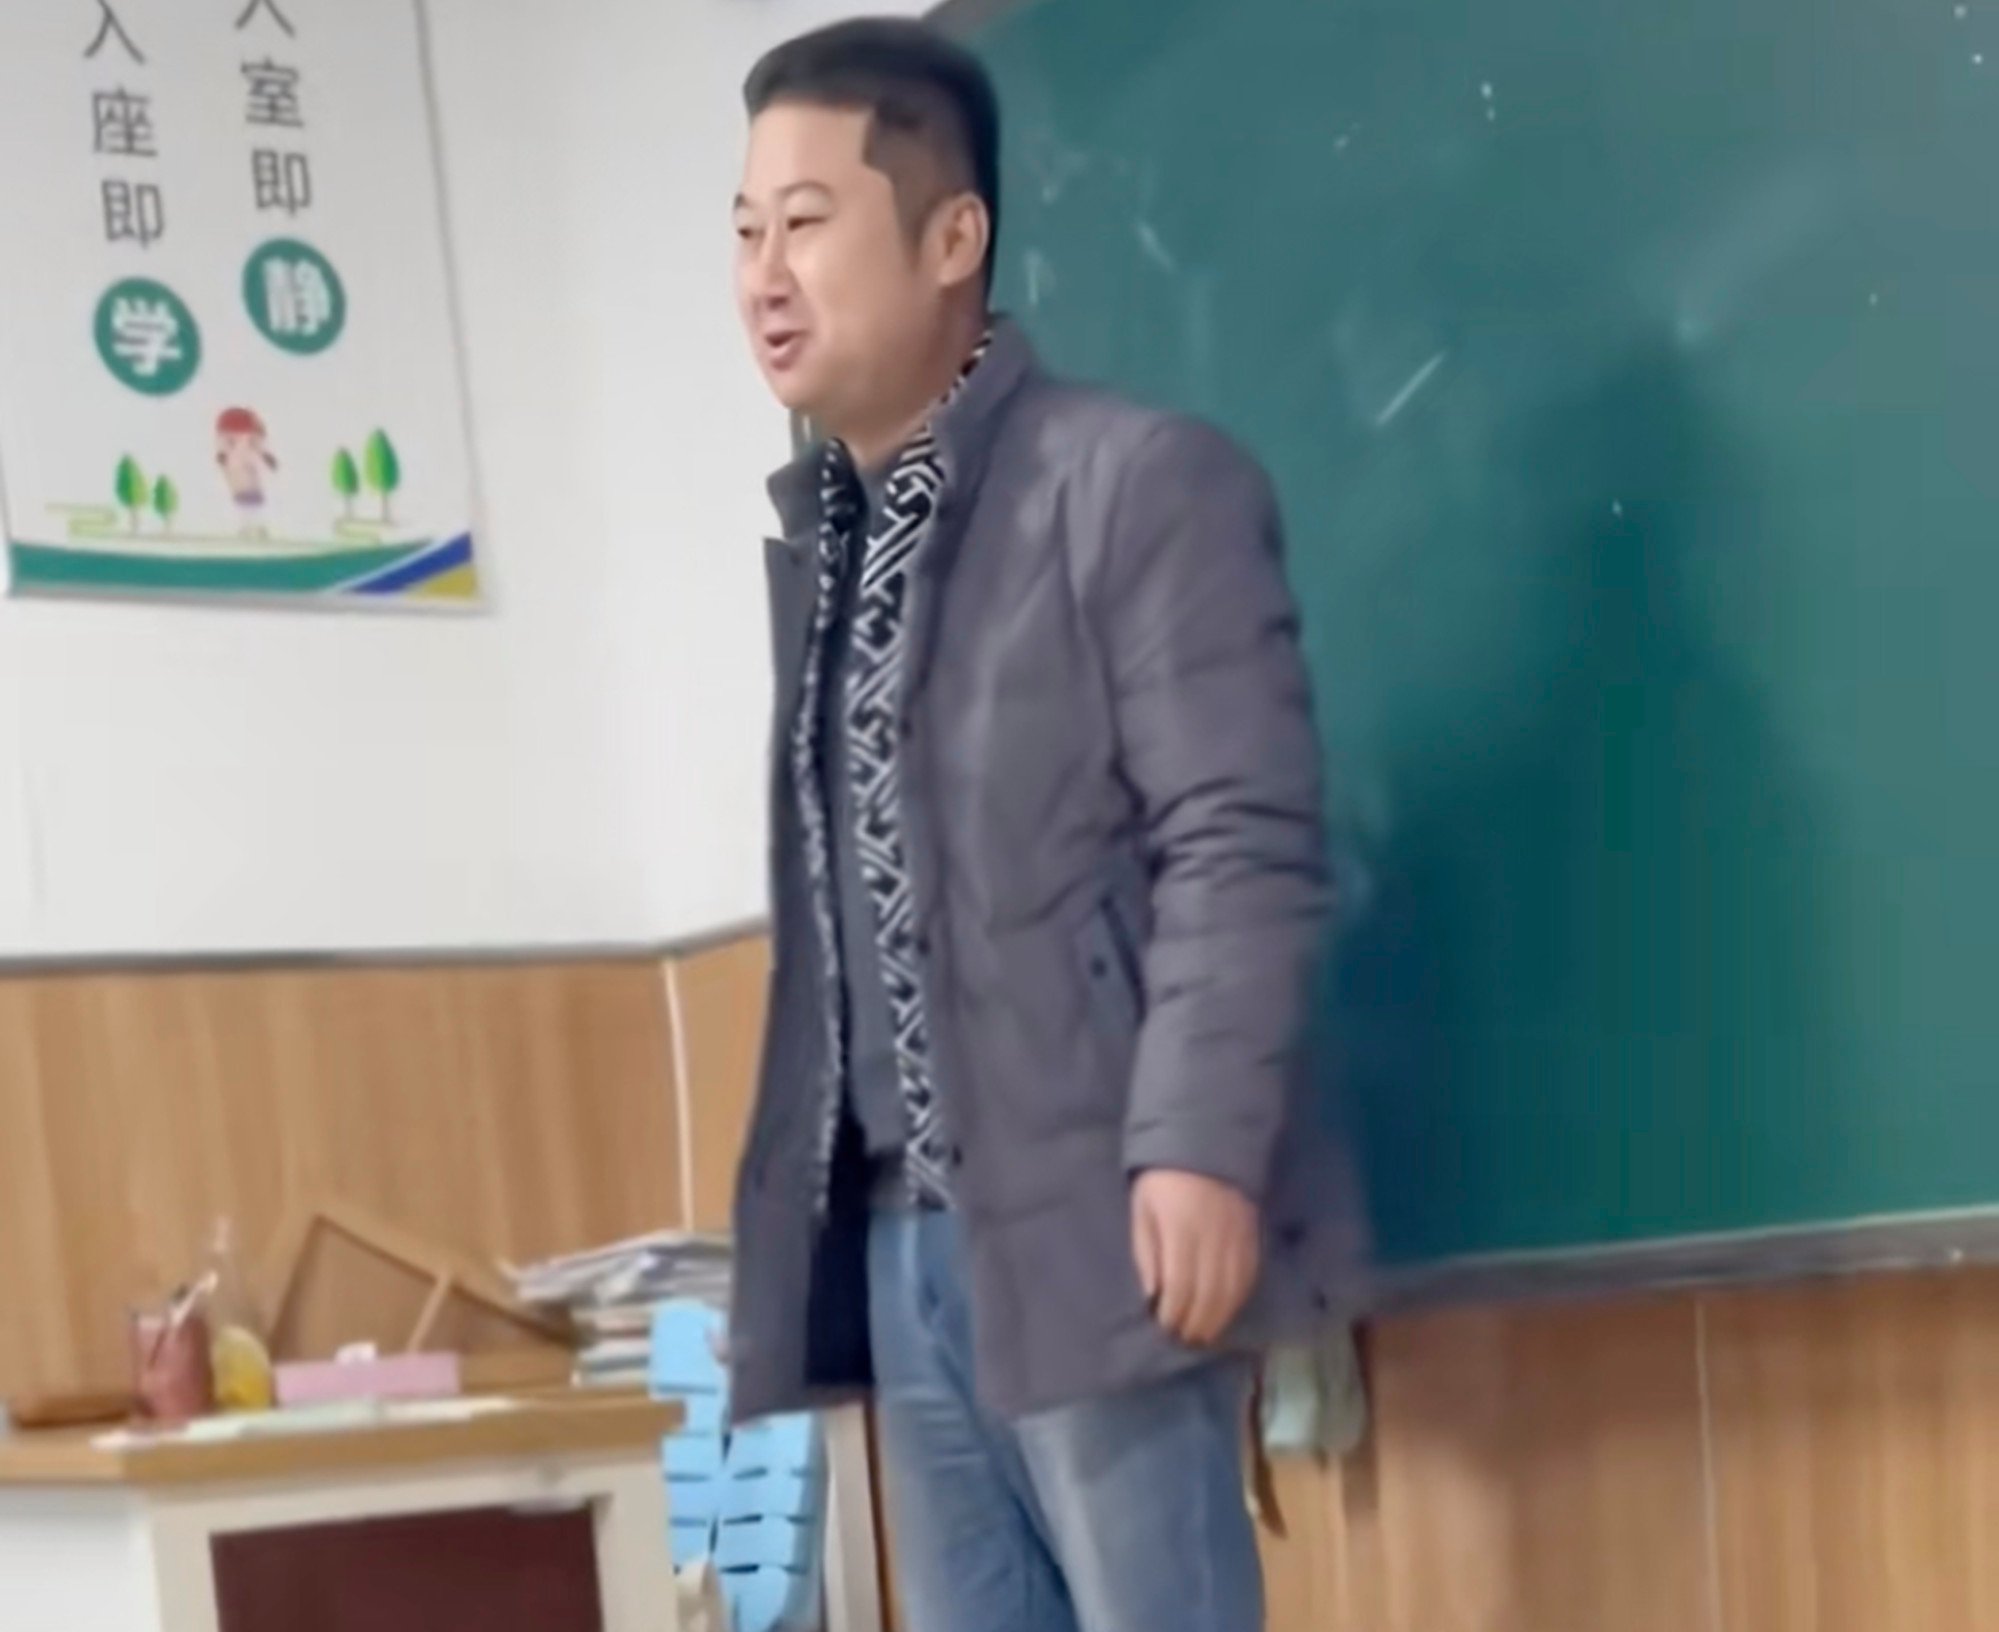 ‘he will be extraordinary’: proud china father praises ‘emotional strength’ of poorly-performing son in emotional school speech